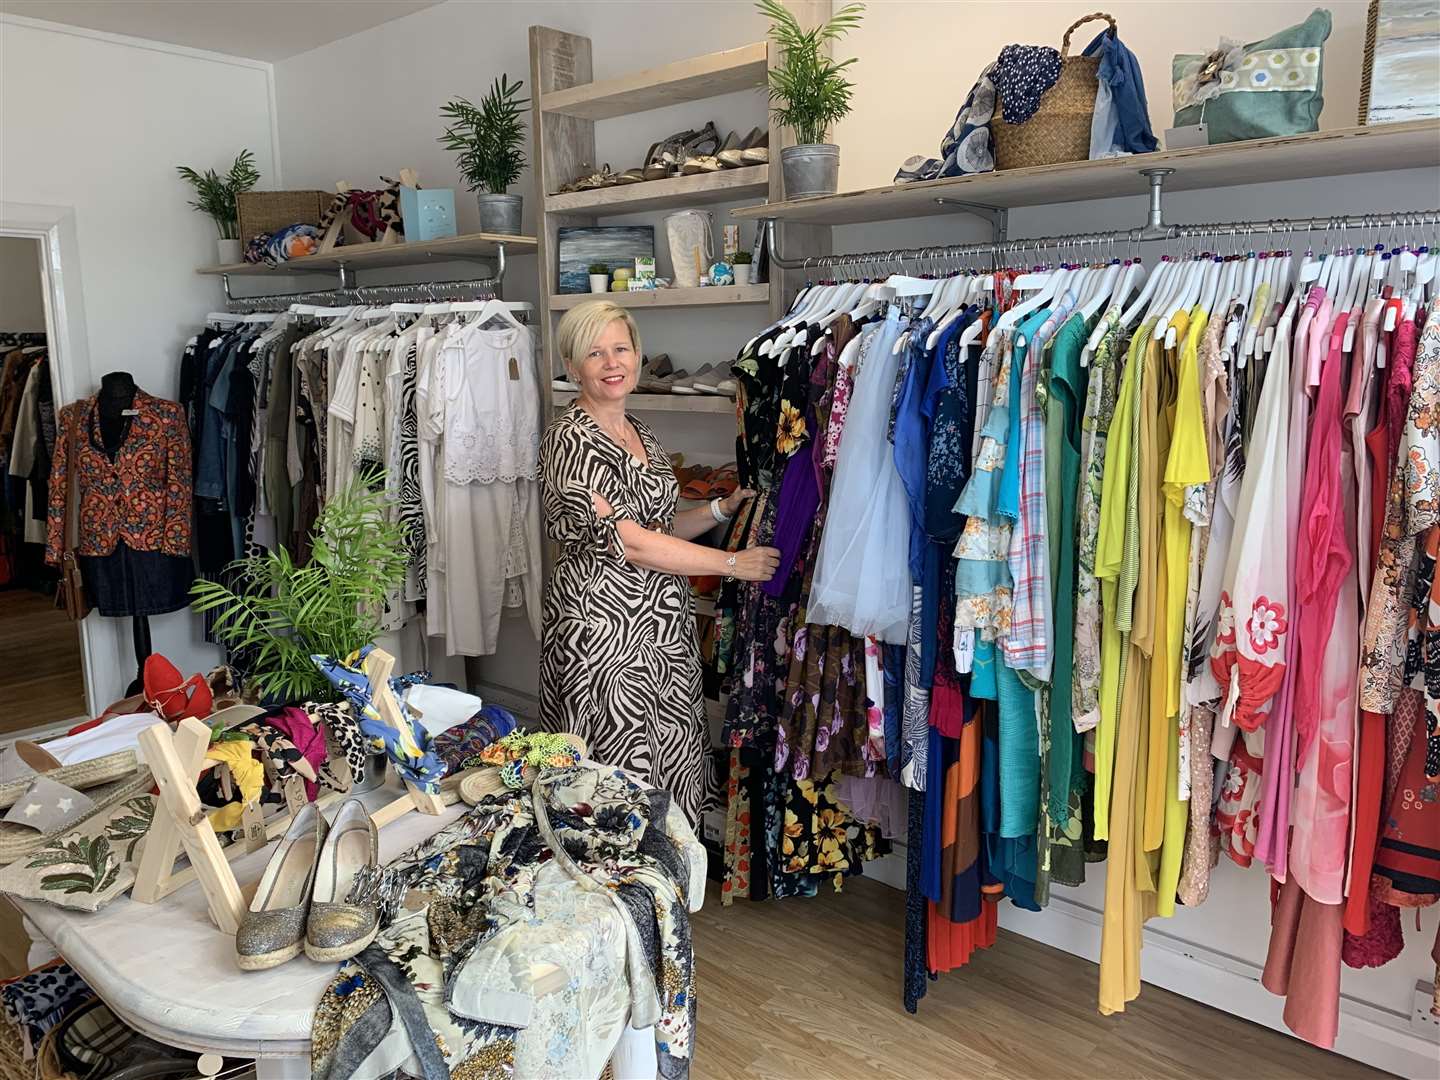 Feel Good Fashion has grown from an online concept to include a shop in Deal